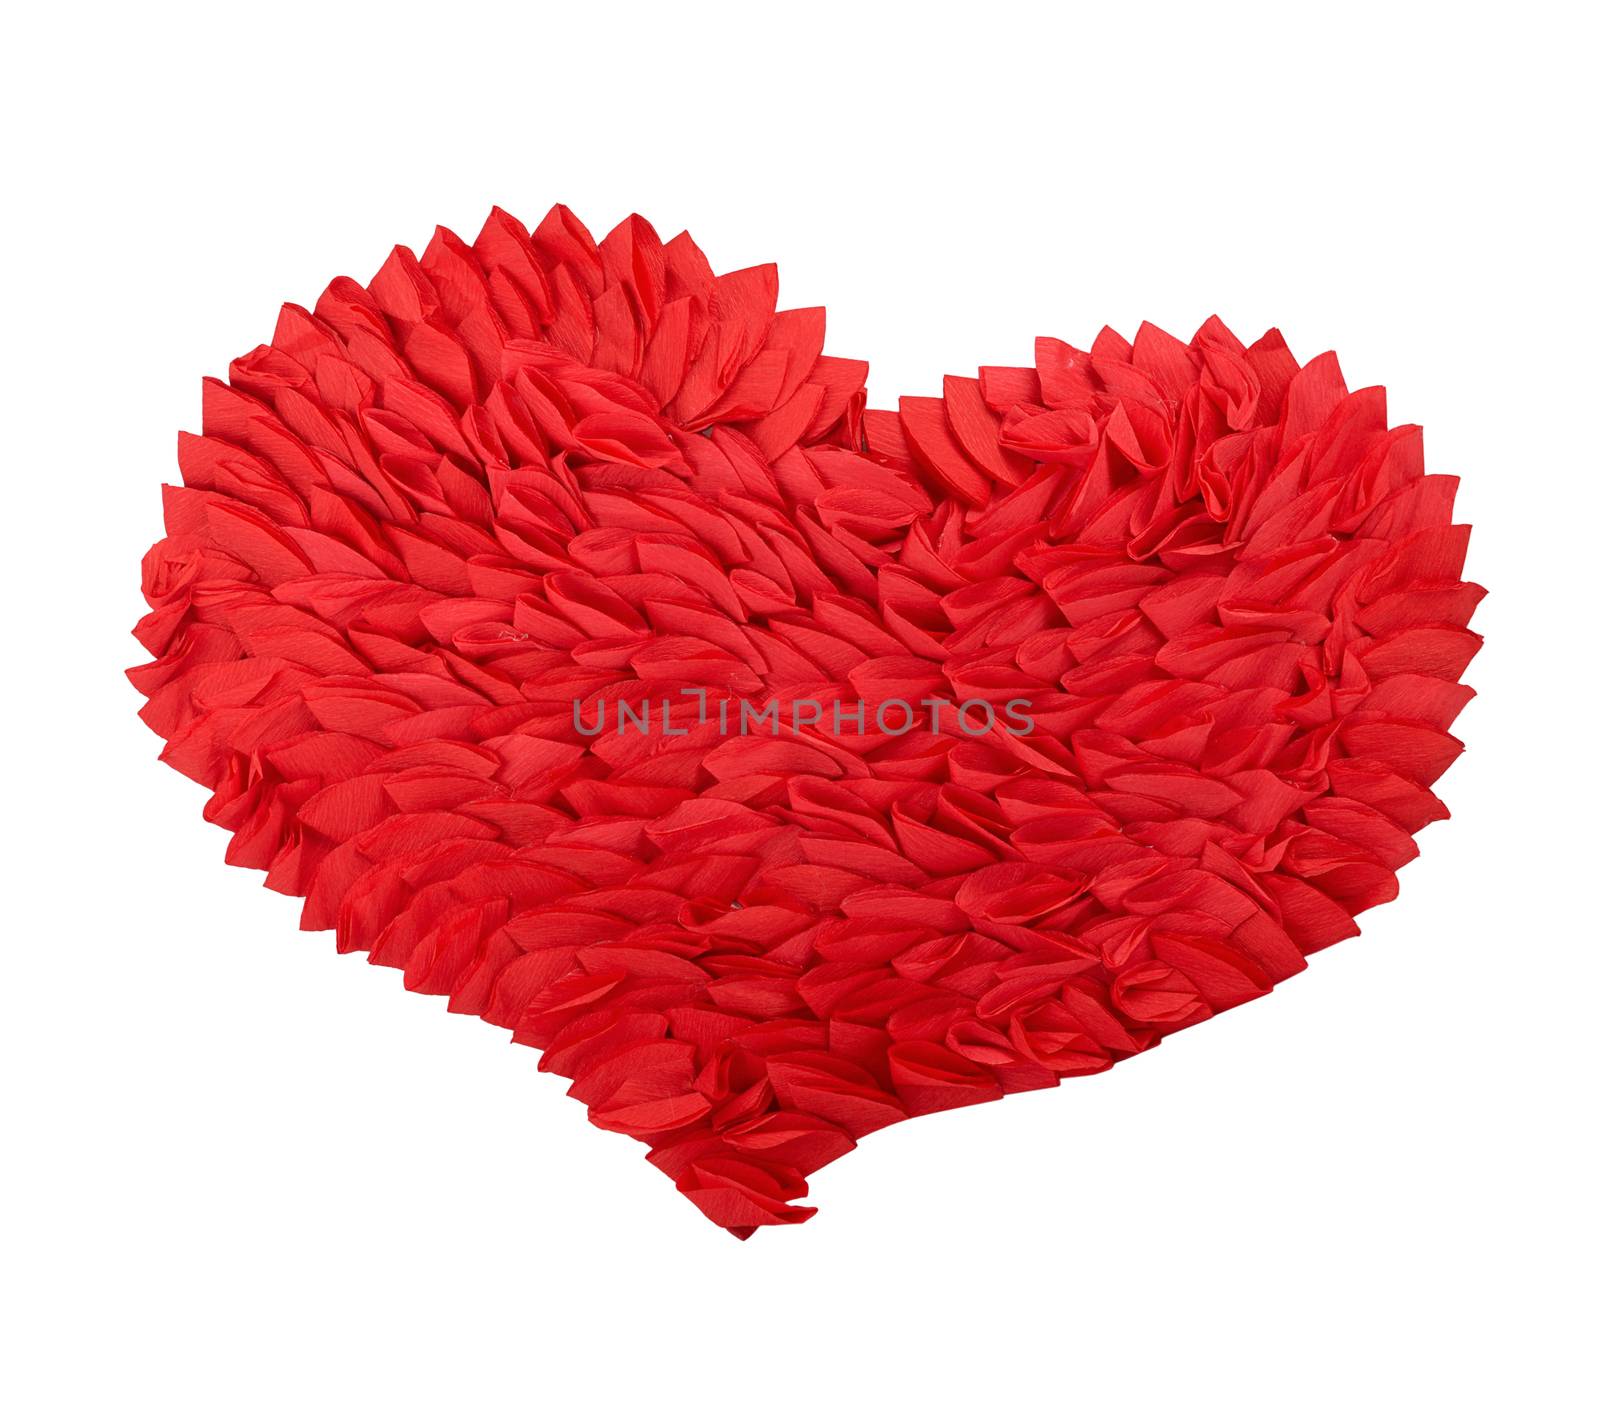 The red paper heart isolated on white